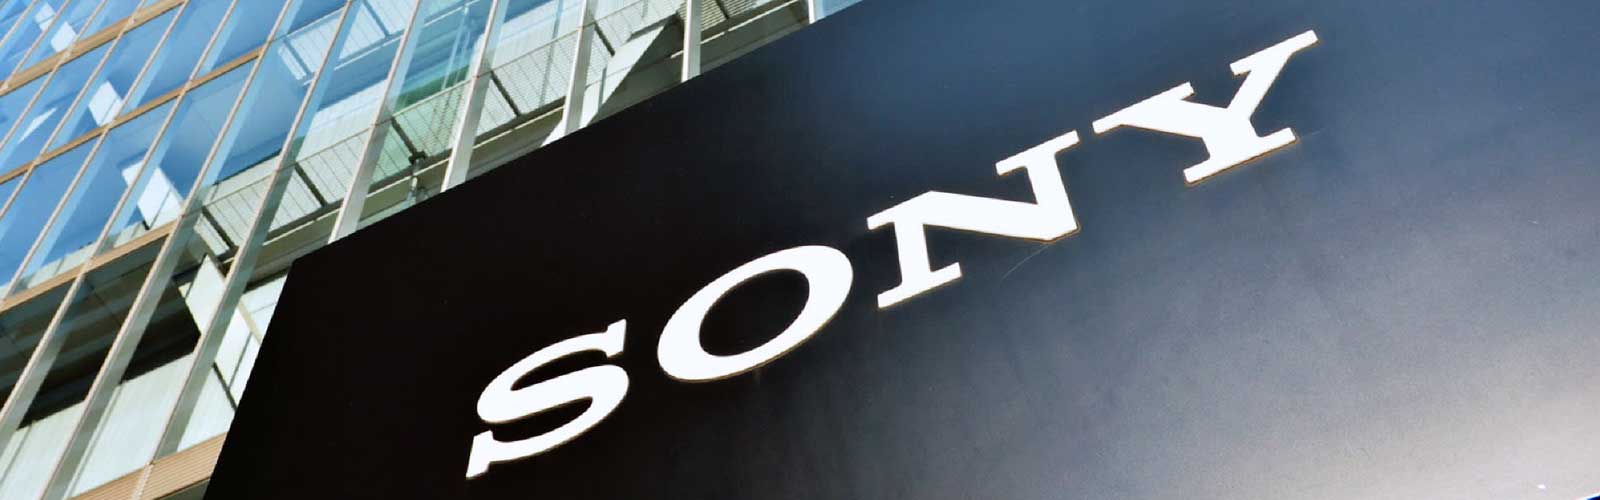 New Sony Pregius S Technology: What to Expect